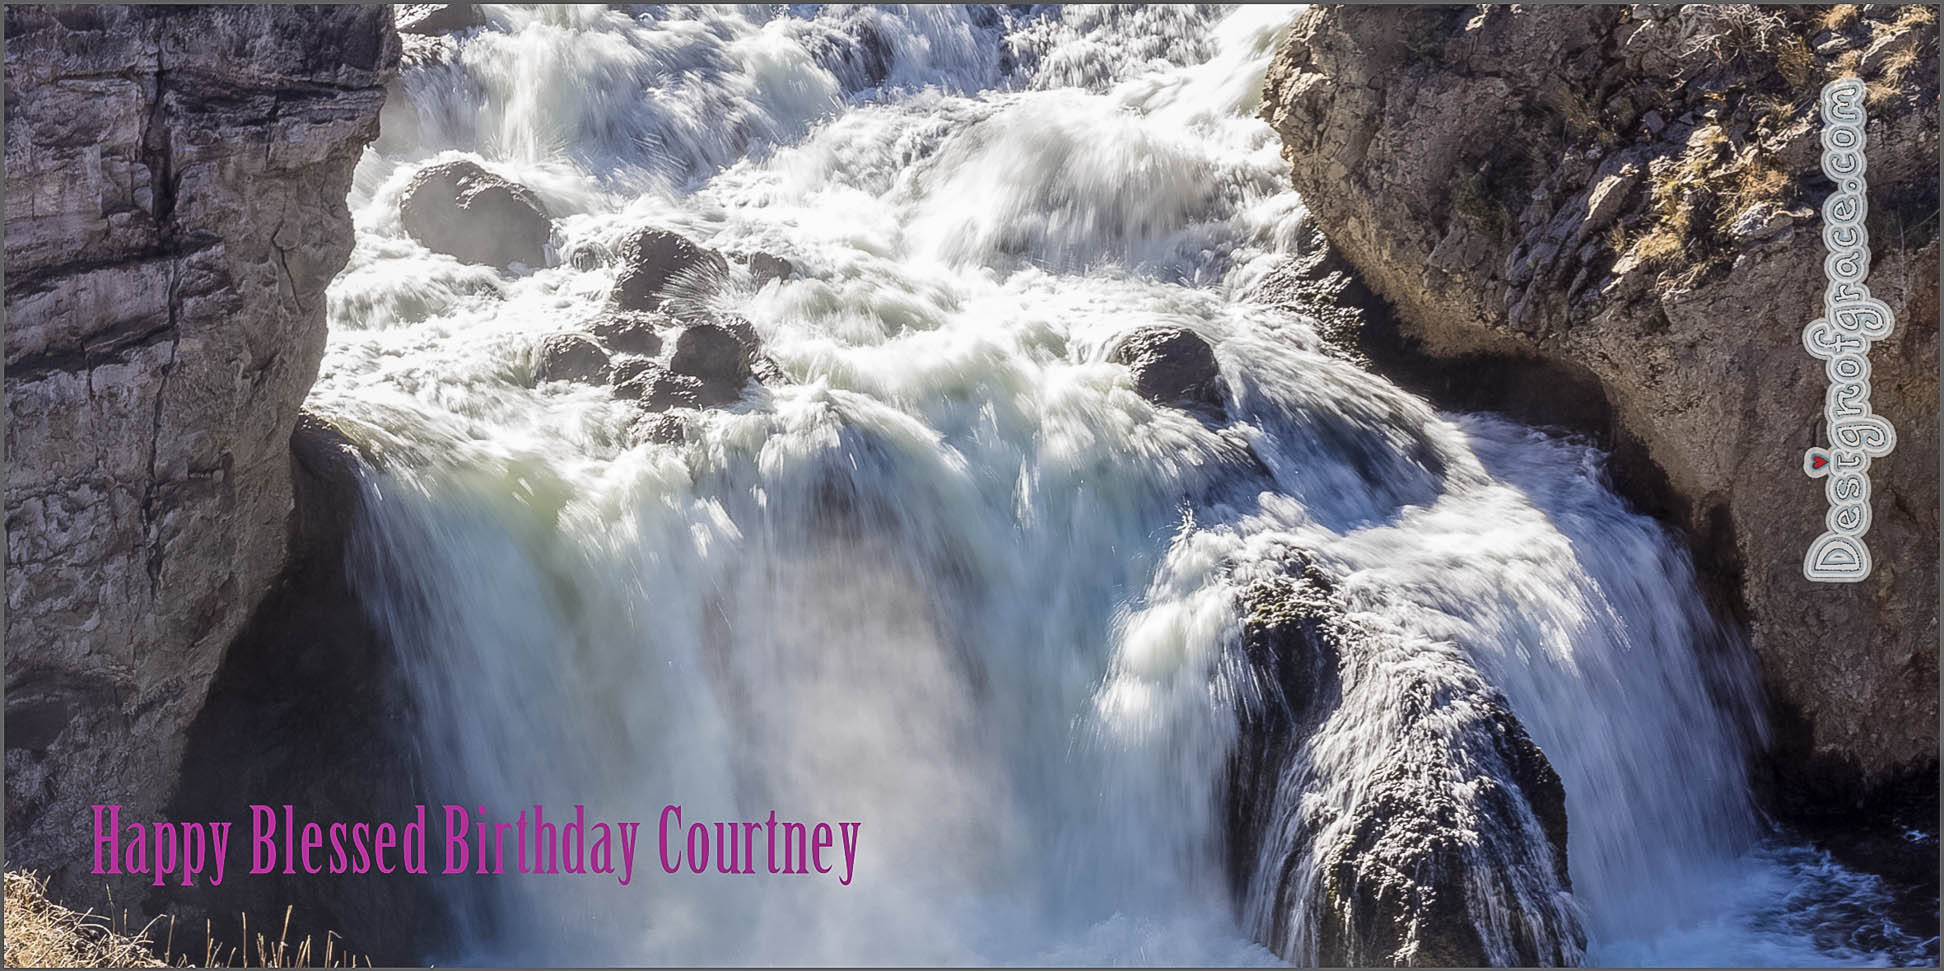 Happy Blessed Birthday Day Courtney<br /> <br /> Thought this photo I took at Yellowstone National Park in America would be perfect for your Birthday card:)